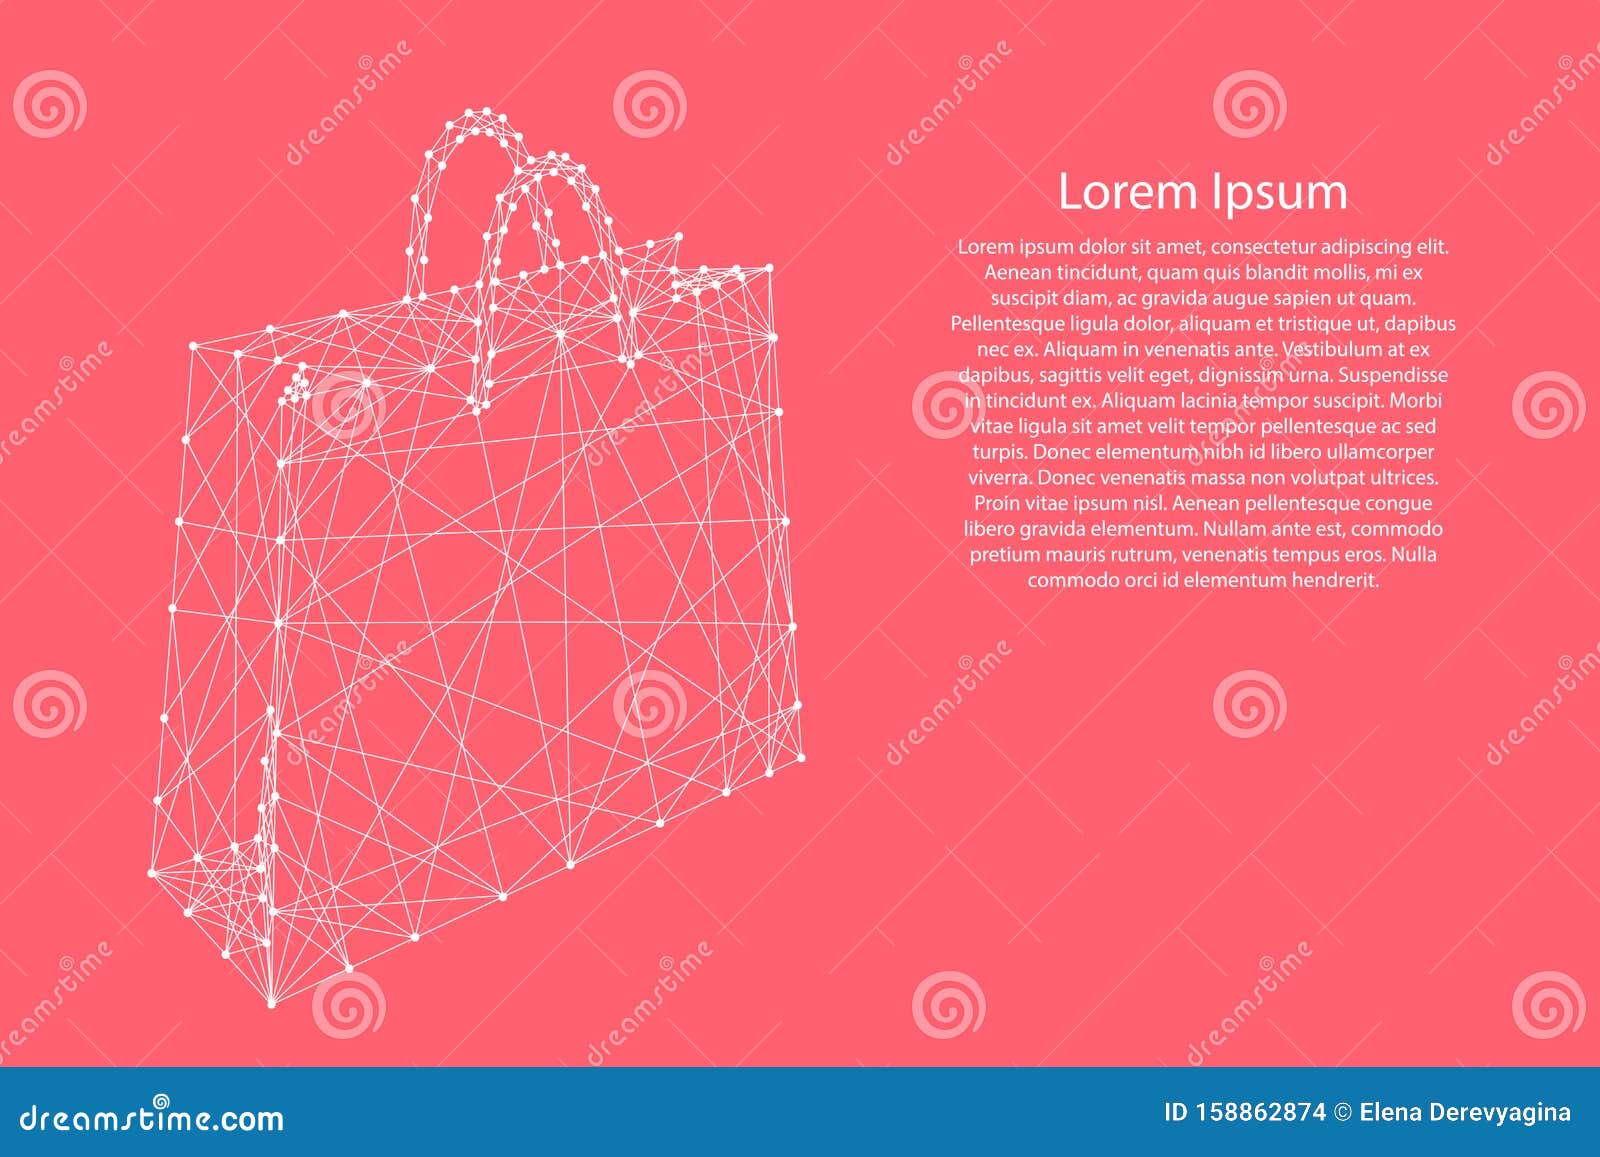 paper bag with handles for shopping from abstract futuristic polygonal white lines and dots on pink rose color coral background